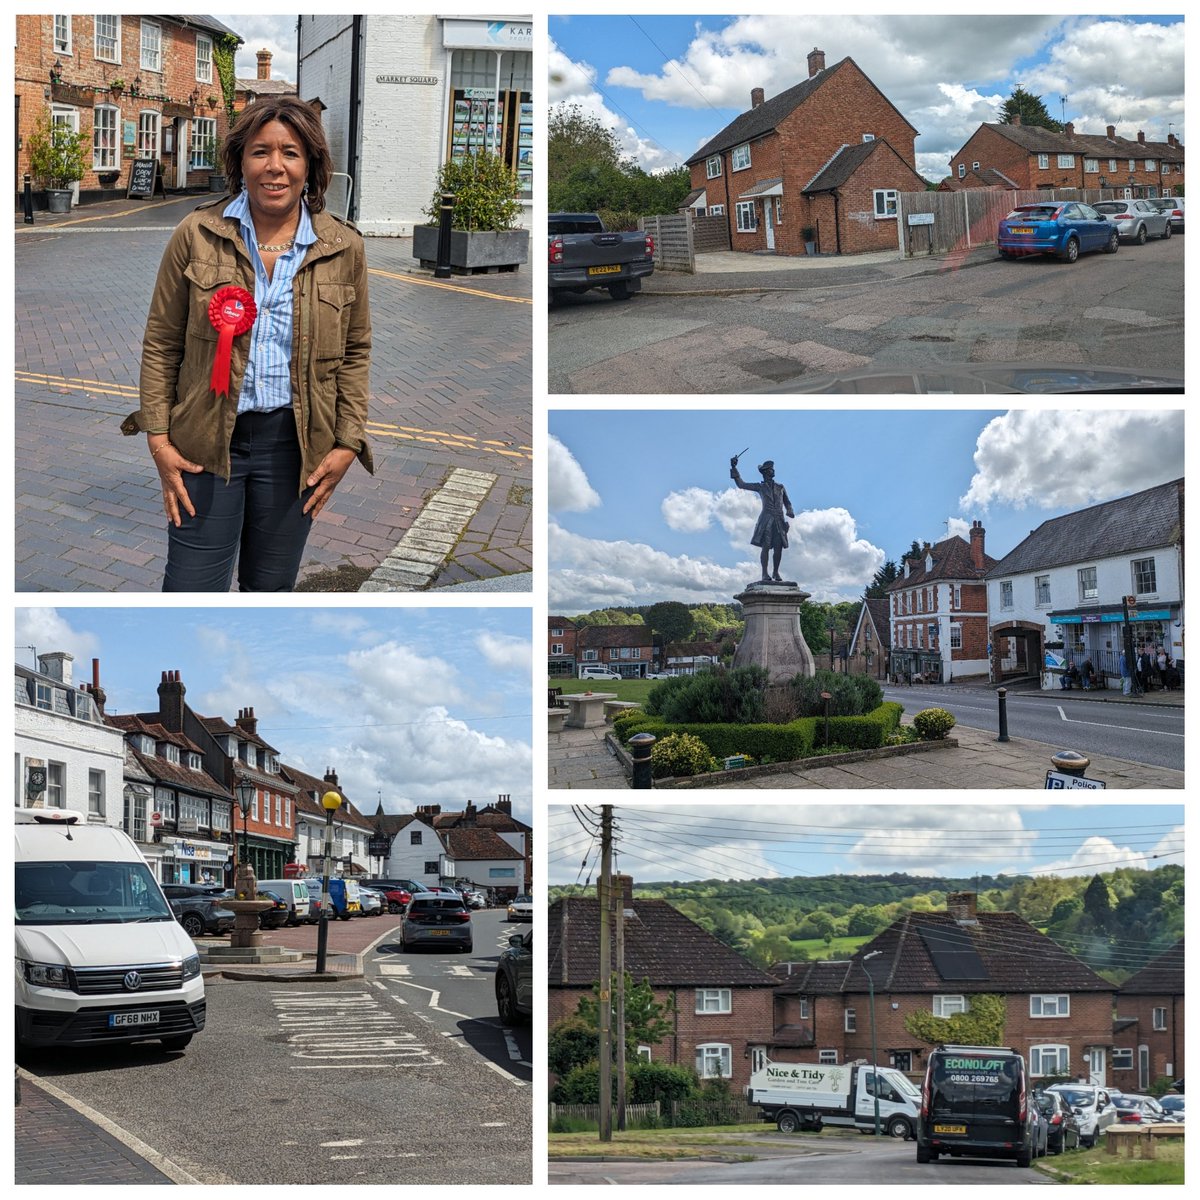 Had a great day meeting residents from Westerham & Crockham Hill. As well as hearing about it's amazing history, got to talk about local concerns including issues around High Street renewal, lack of buses and poor internet connection.